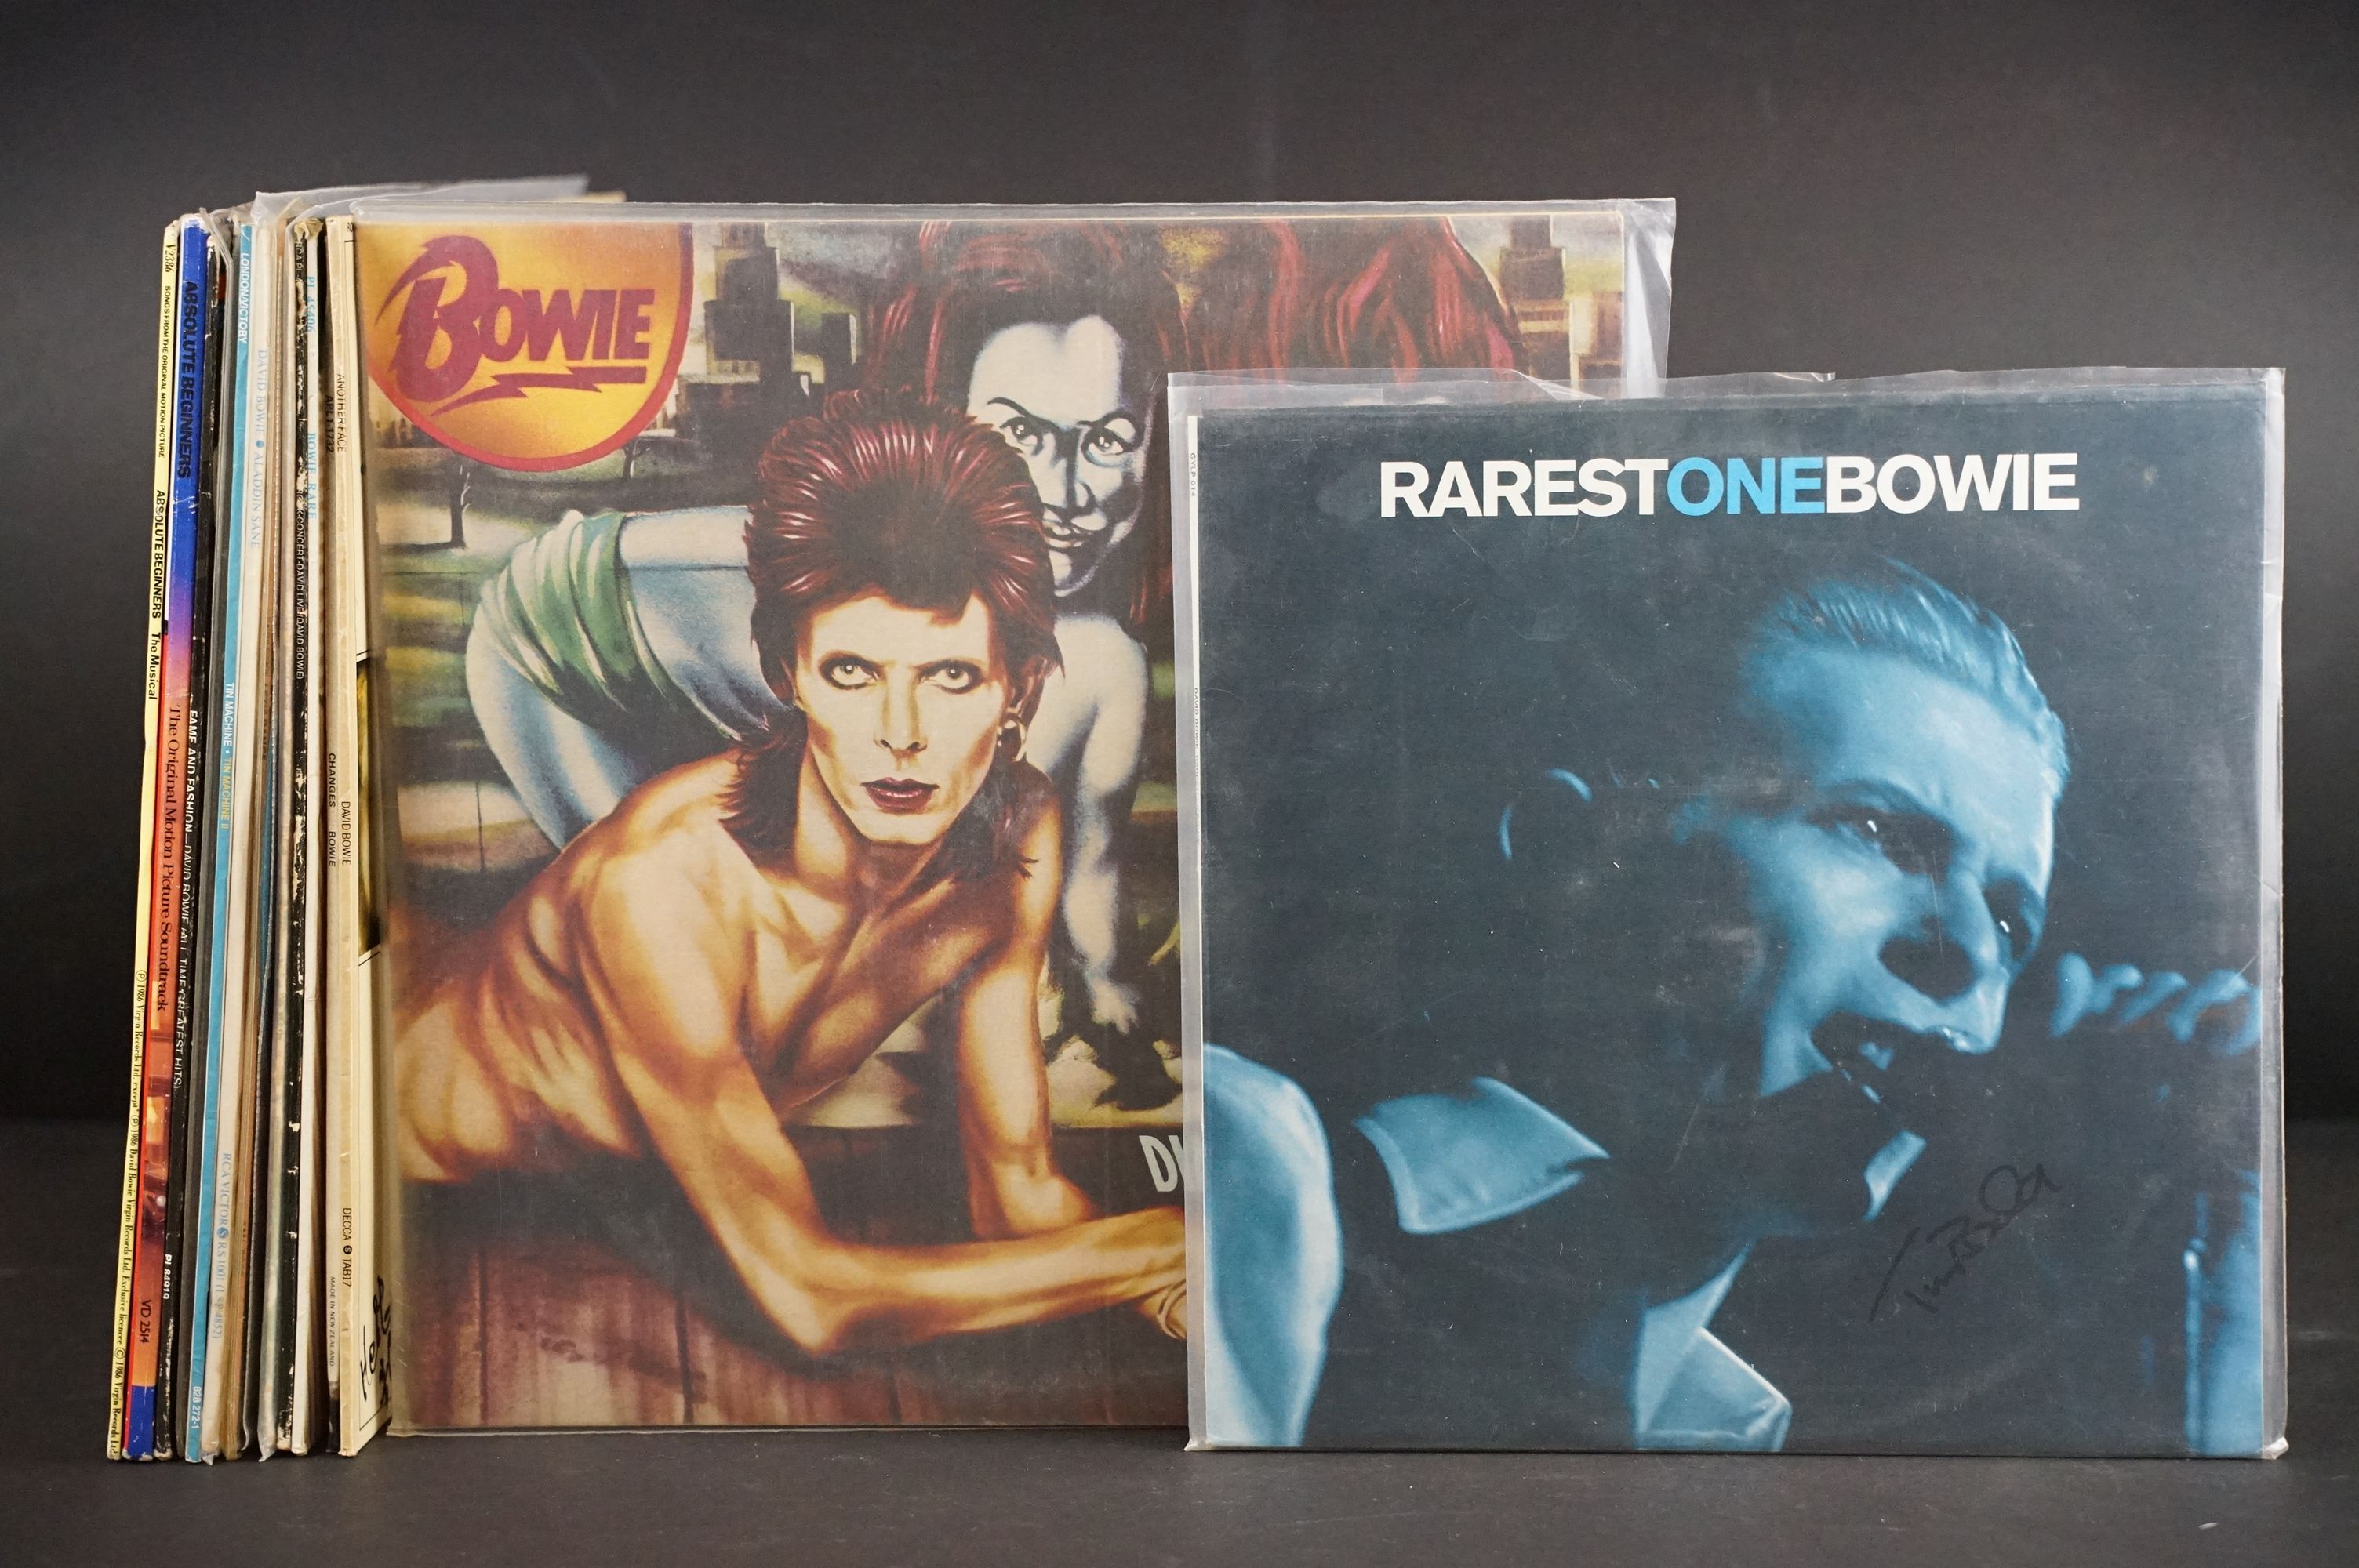 Vinyl / Autographs - 15 David Bowie and related albums signed by members of David Bowie’s band and